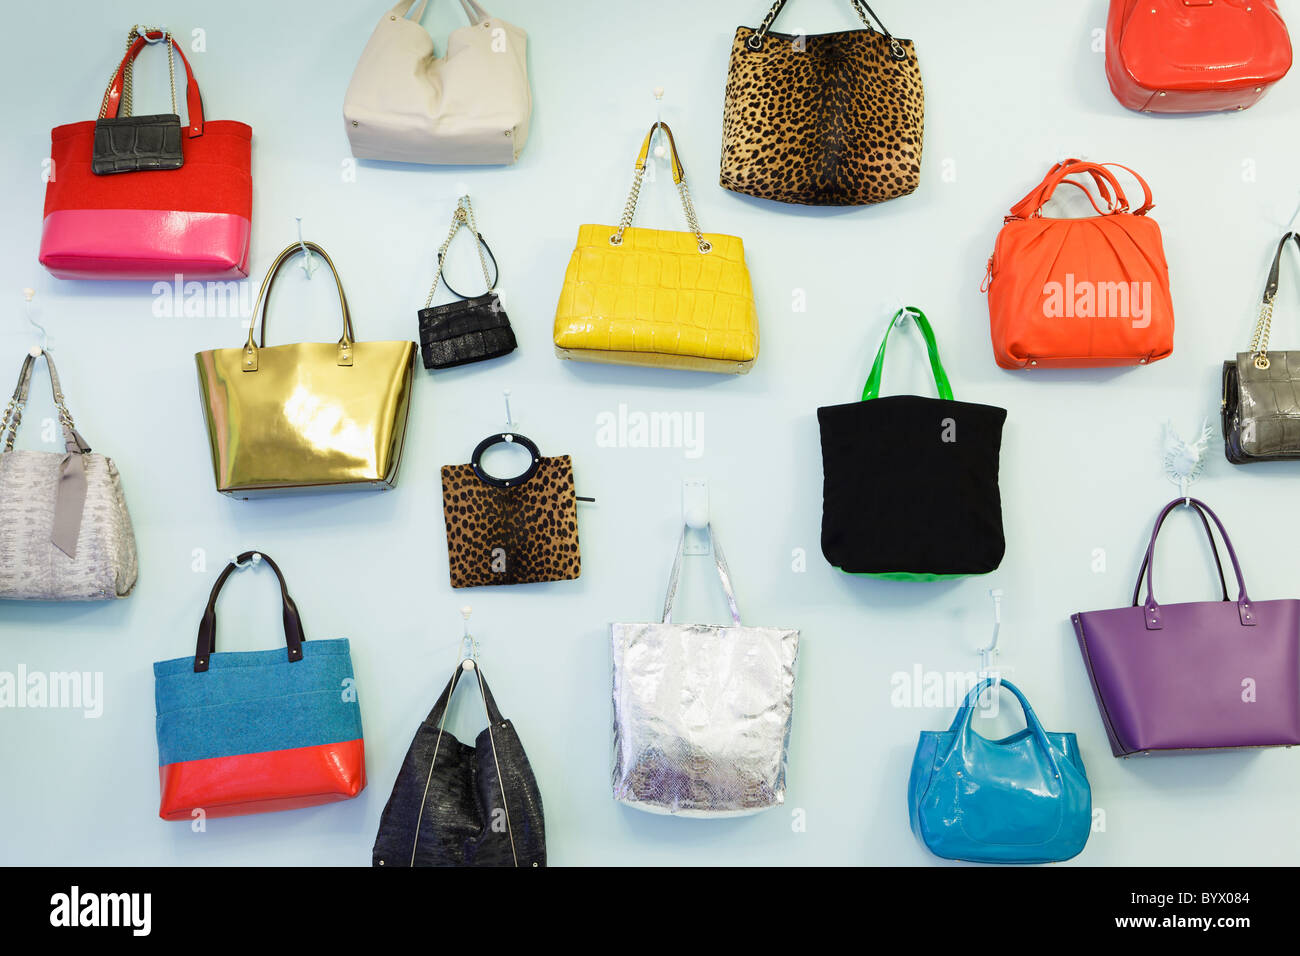 A wall of handbags at the Kate Spade pop-up store in Covent Garden, London, England Stock Photo